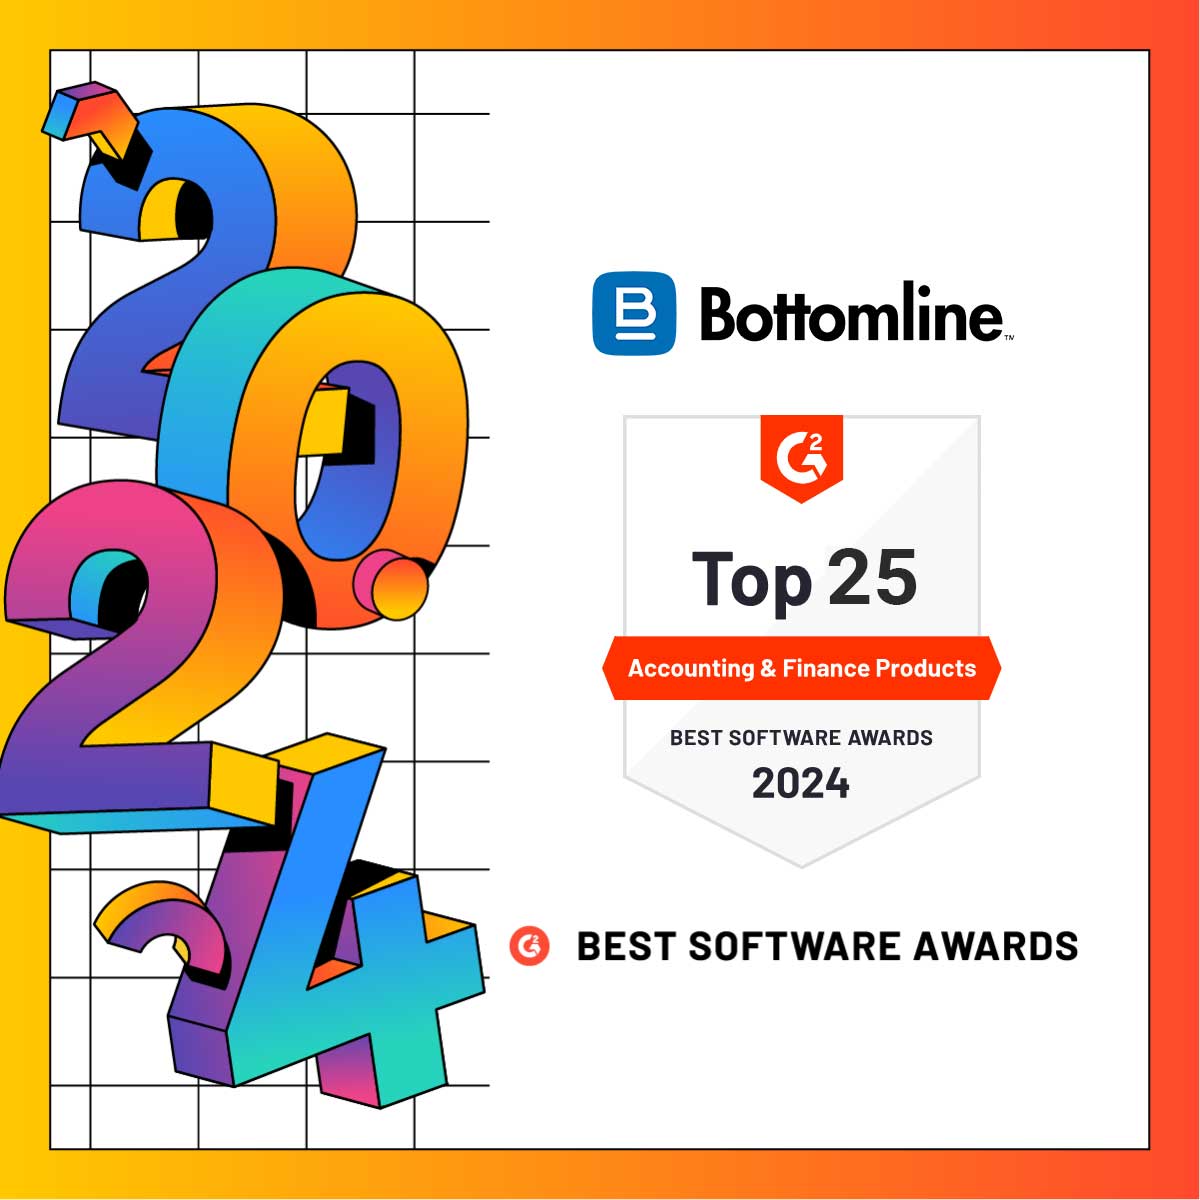 Delighting our customers is a guiding principle. So, we are delighted to be recognized with a G2 Best Accounting & Finance Software Award. Thank you to our customers - your ongoing support and feedback is valuable! #B2BPayments #APAutomation #Accounting #Finance